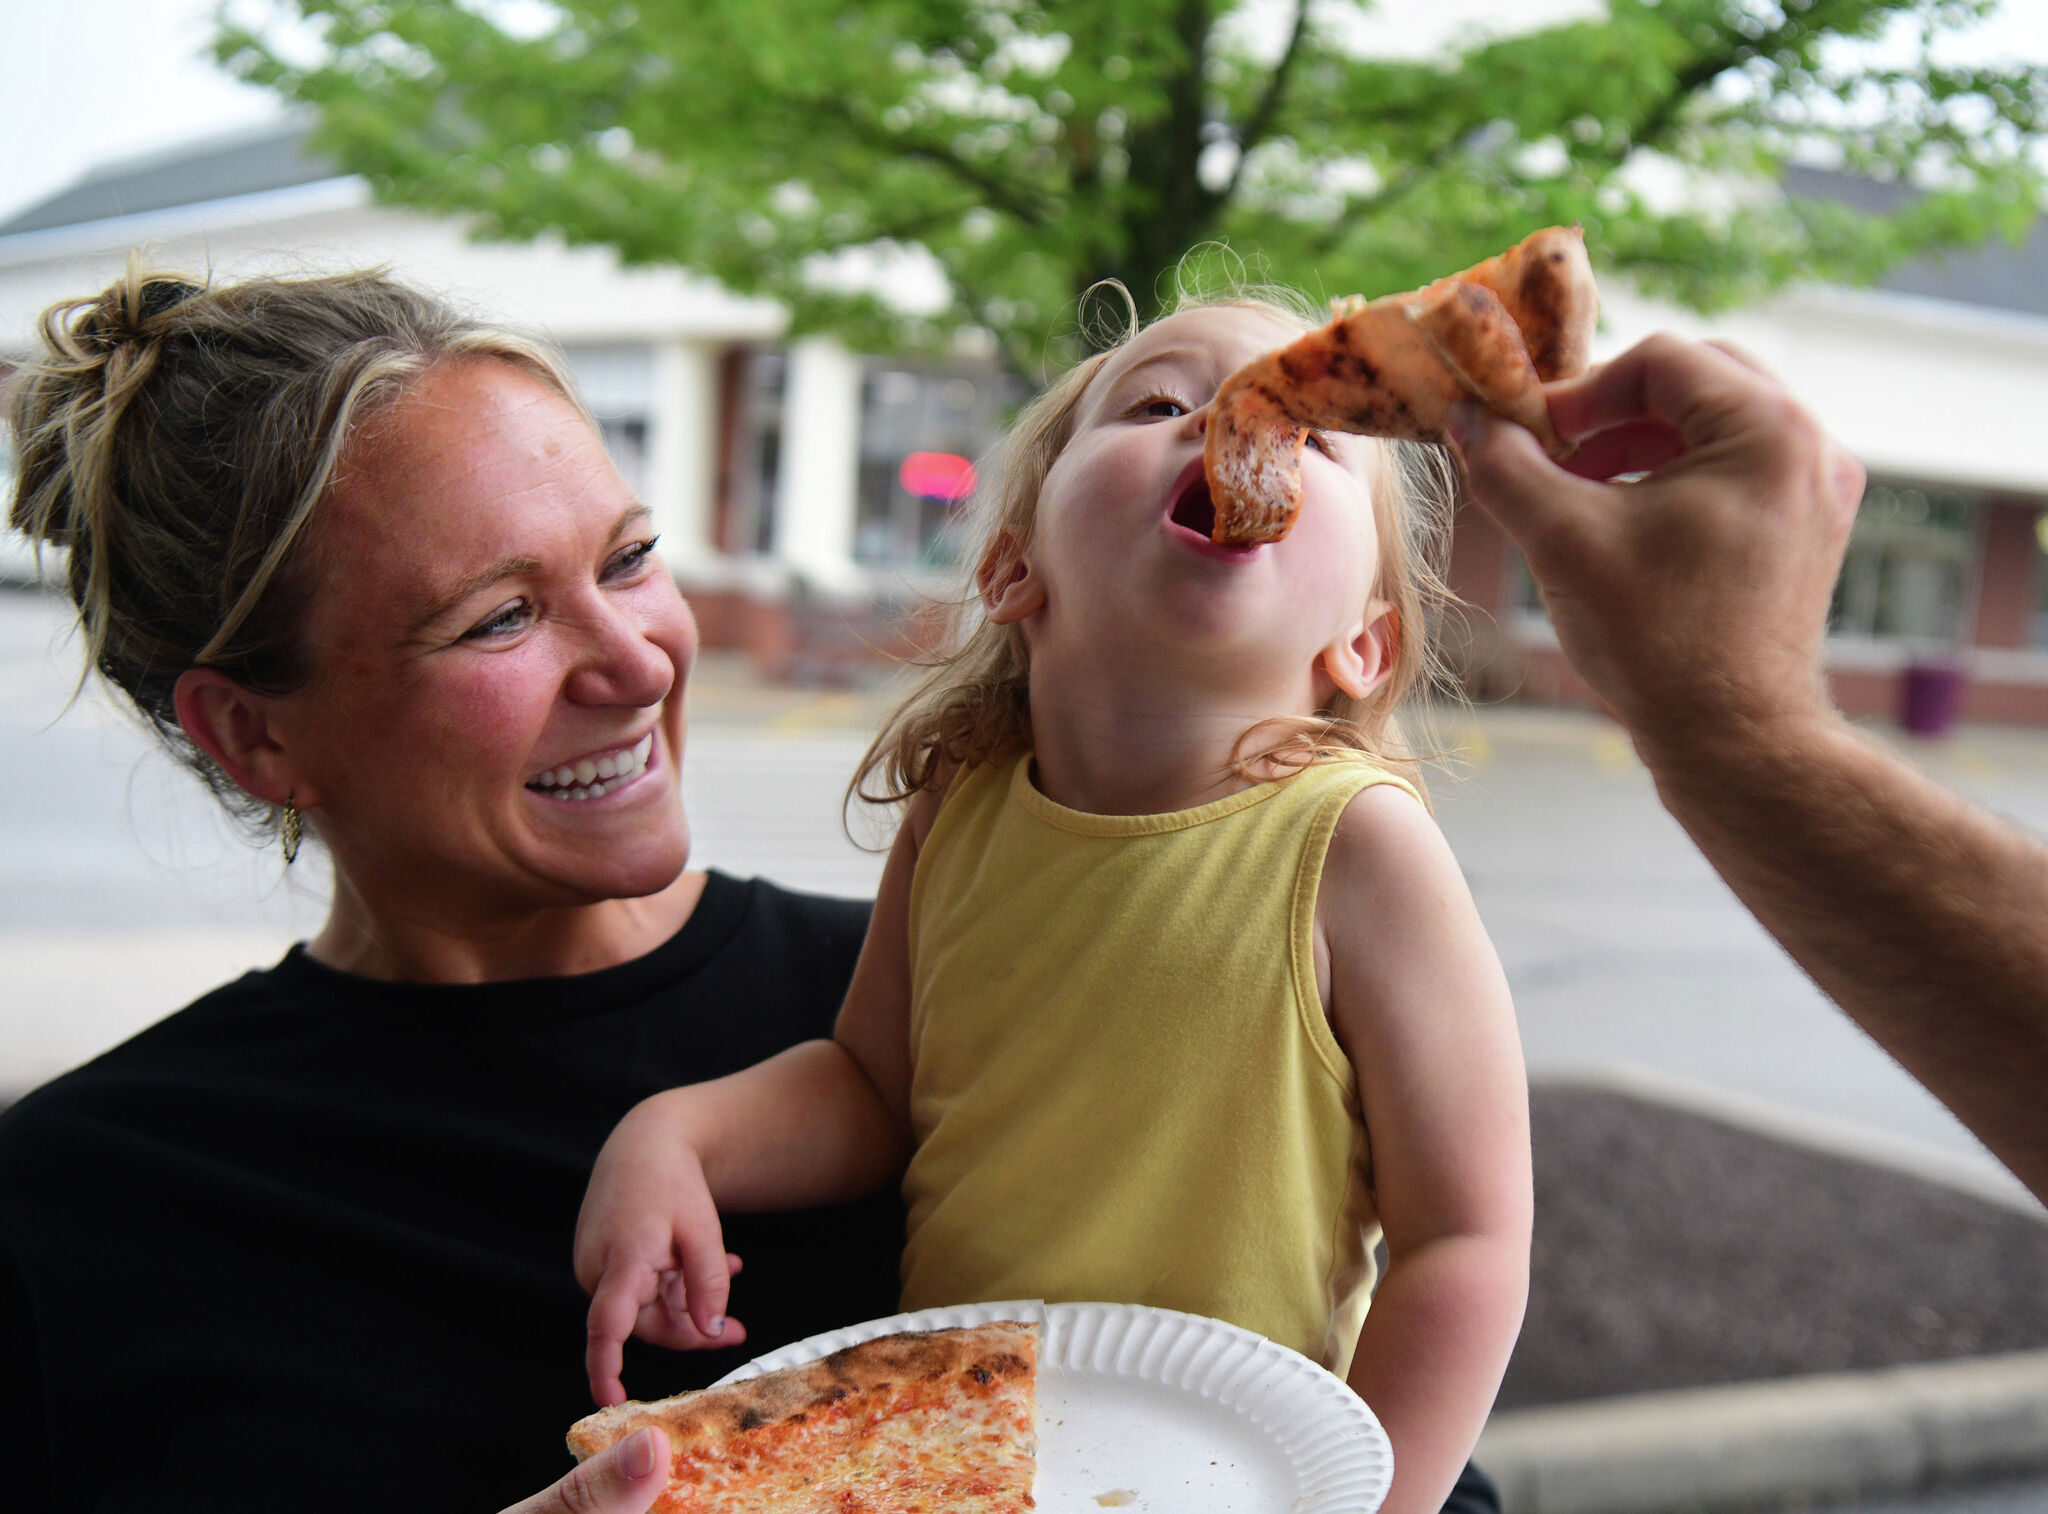 Camille's Gushing Over Good Pizza Rating As Barstool Visits Tolland